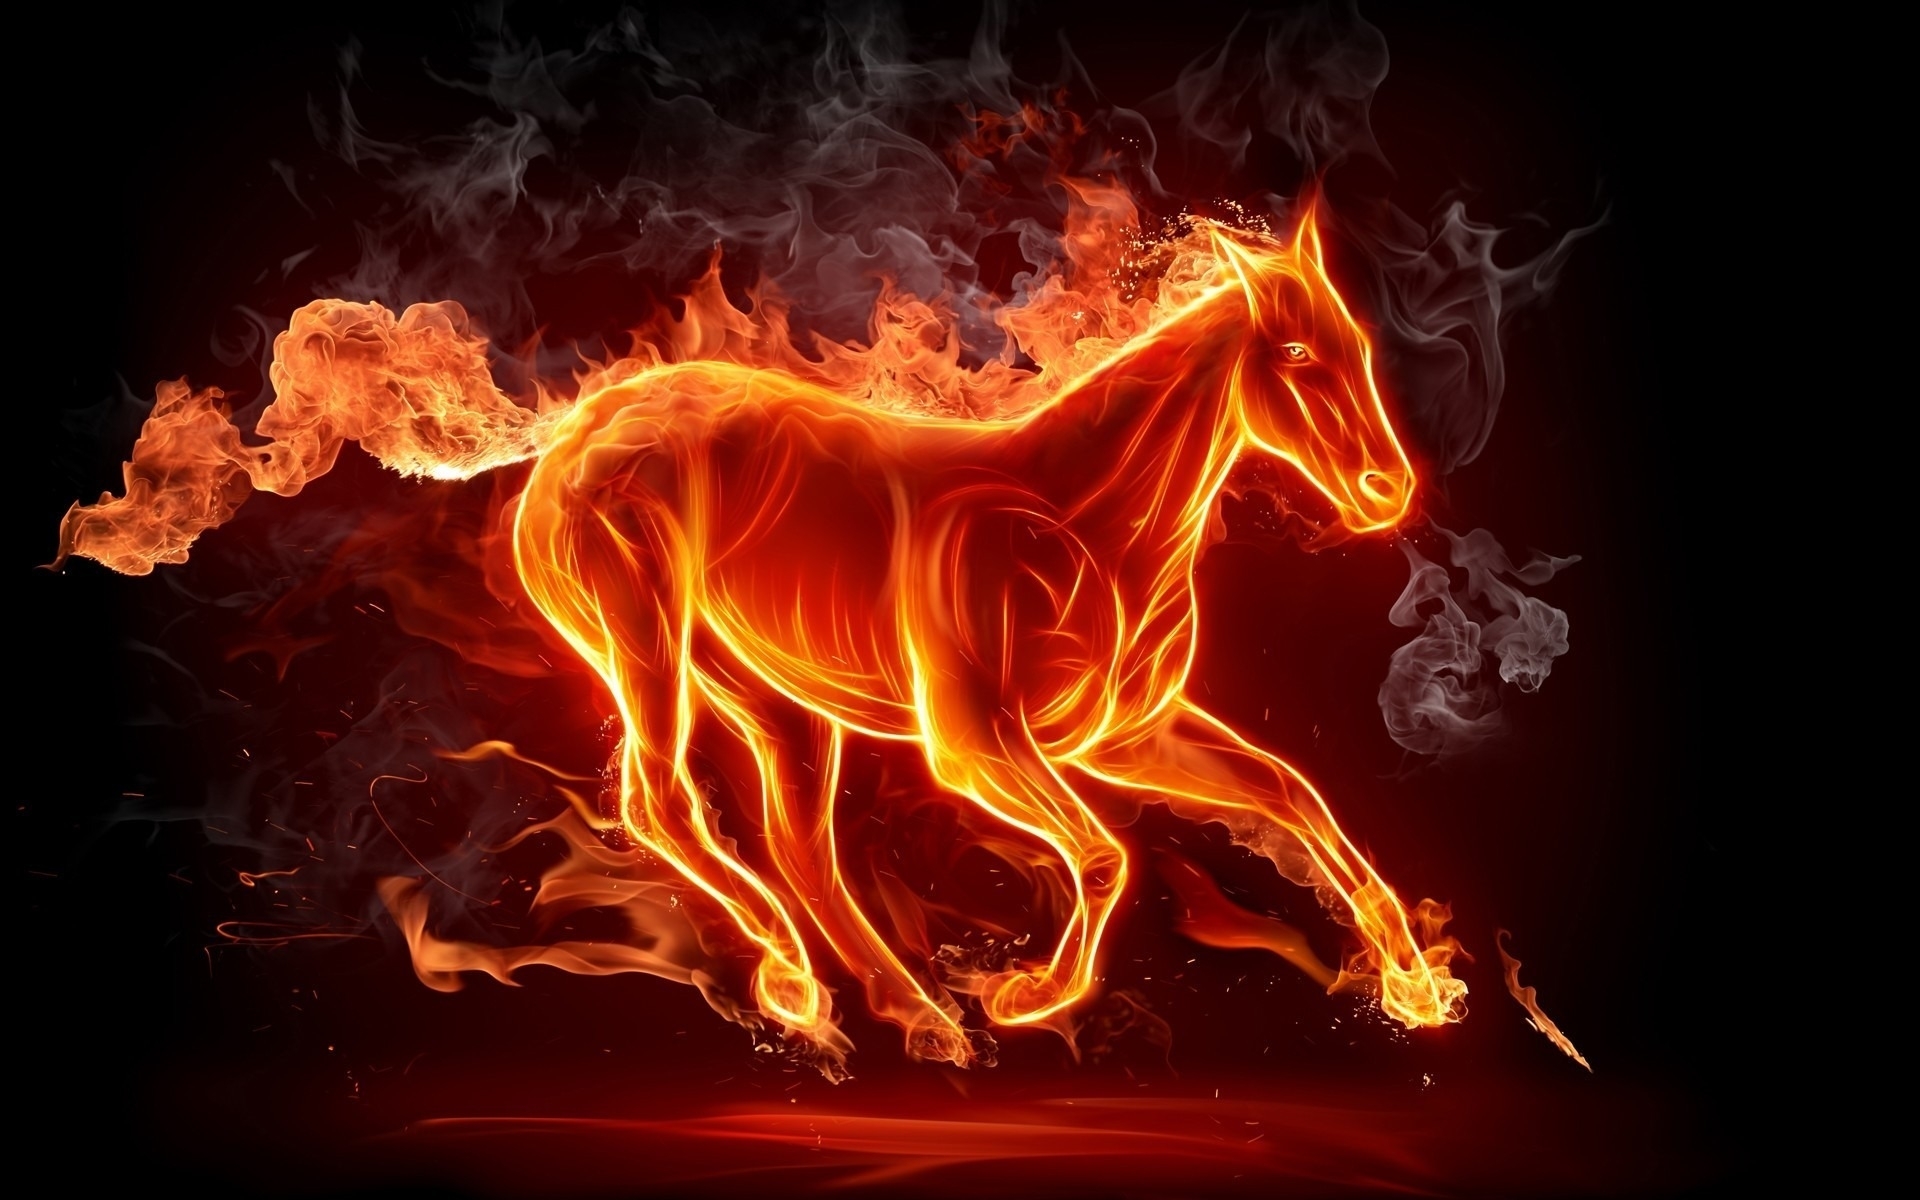 horses, background, fire, pictures, red lock screen backgrounds